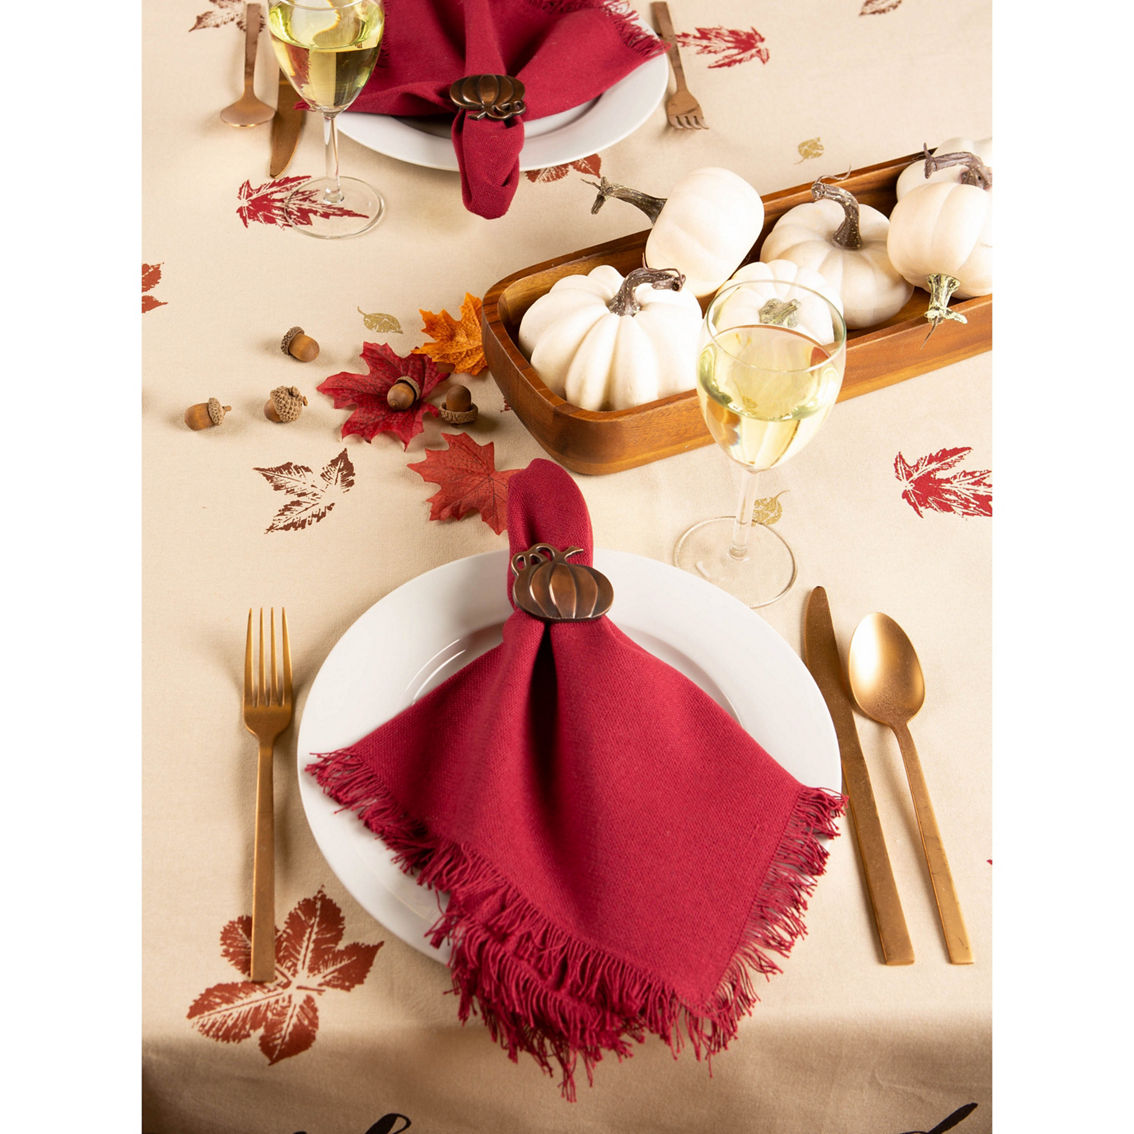 Design Imports 70 in. Round Rustic Leaves Print Tablecloth - Image 6 of 7